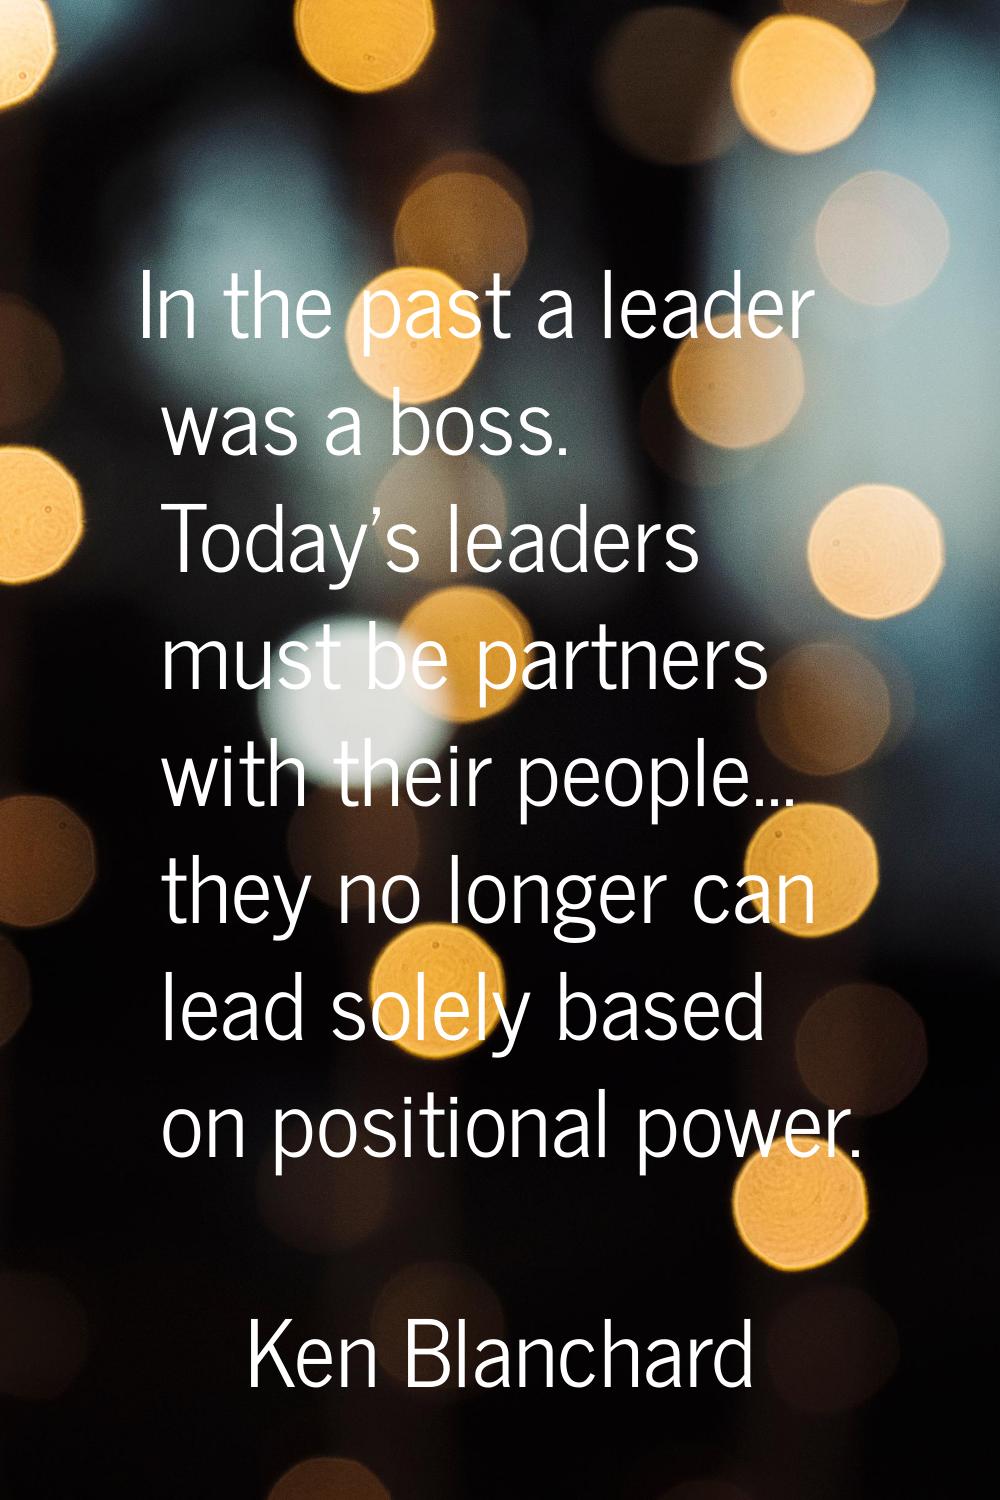 In the past a leader was a boss. Today's leaders must be partners with their people... they no long